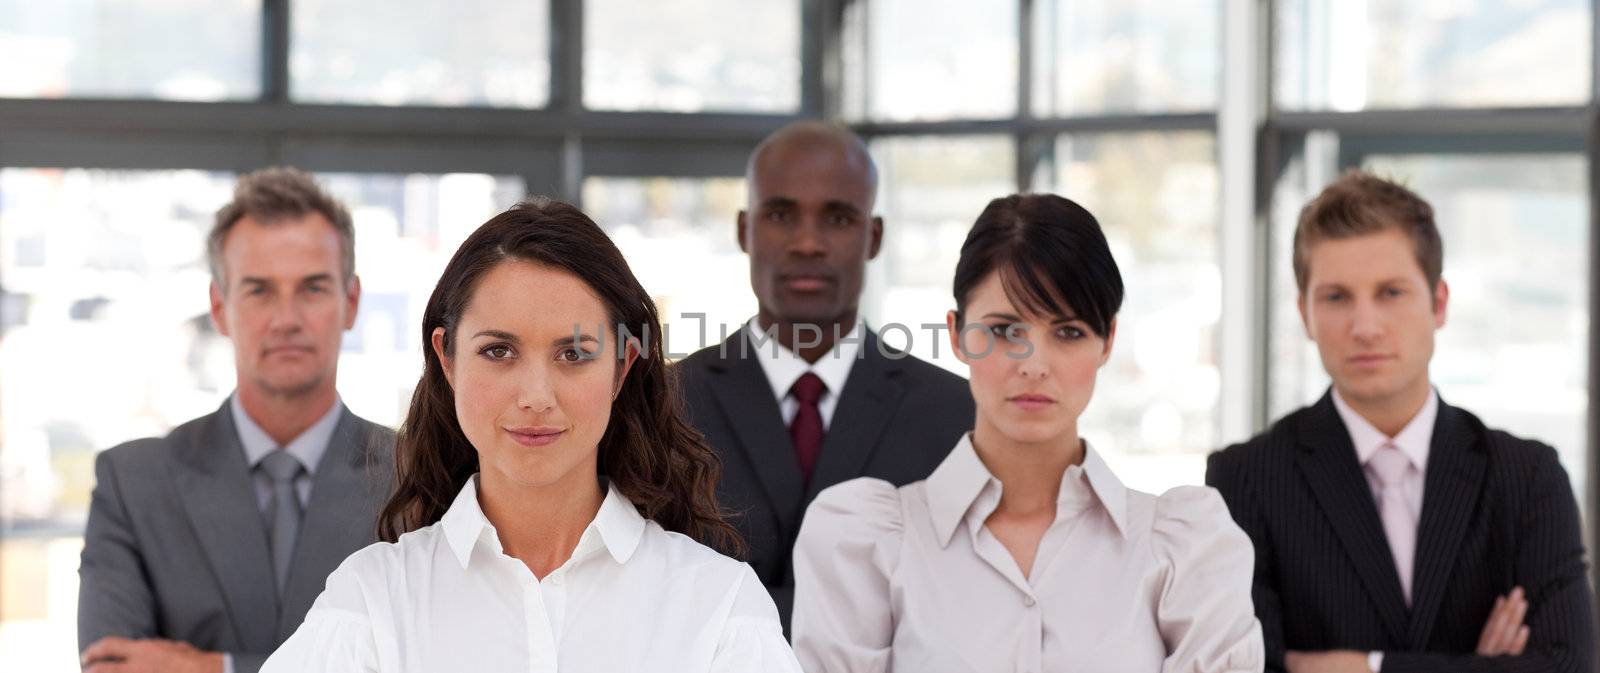 Portrait of multi-ethnic business people looking at the camera in a office